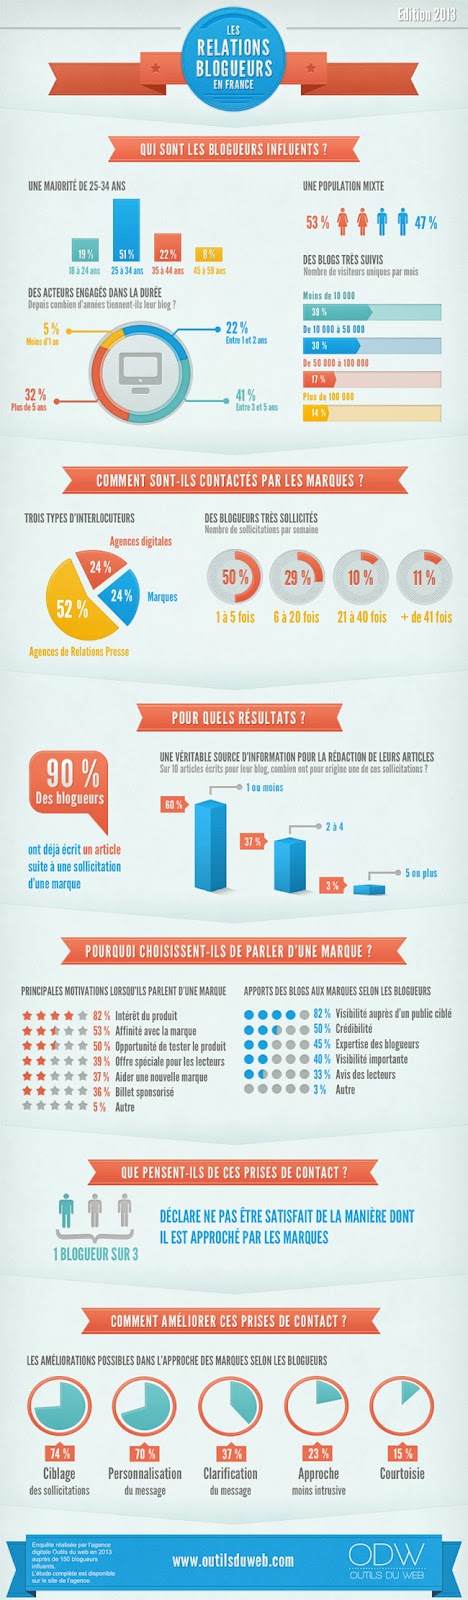 infographie-relation-blogueurs-marques